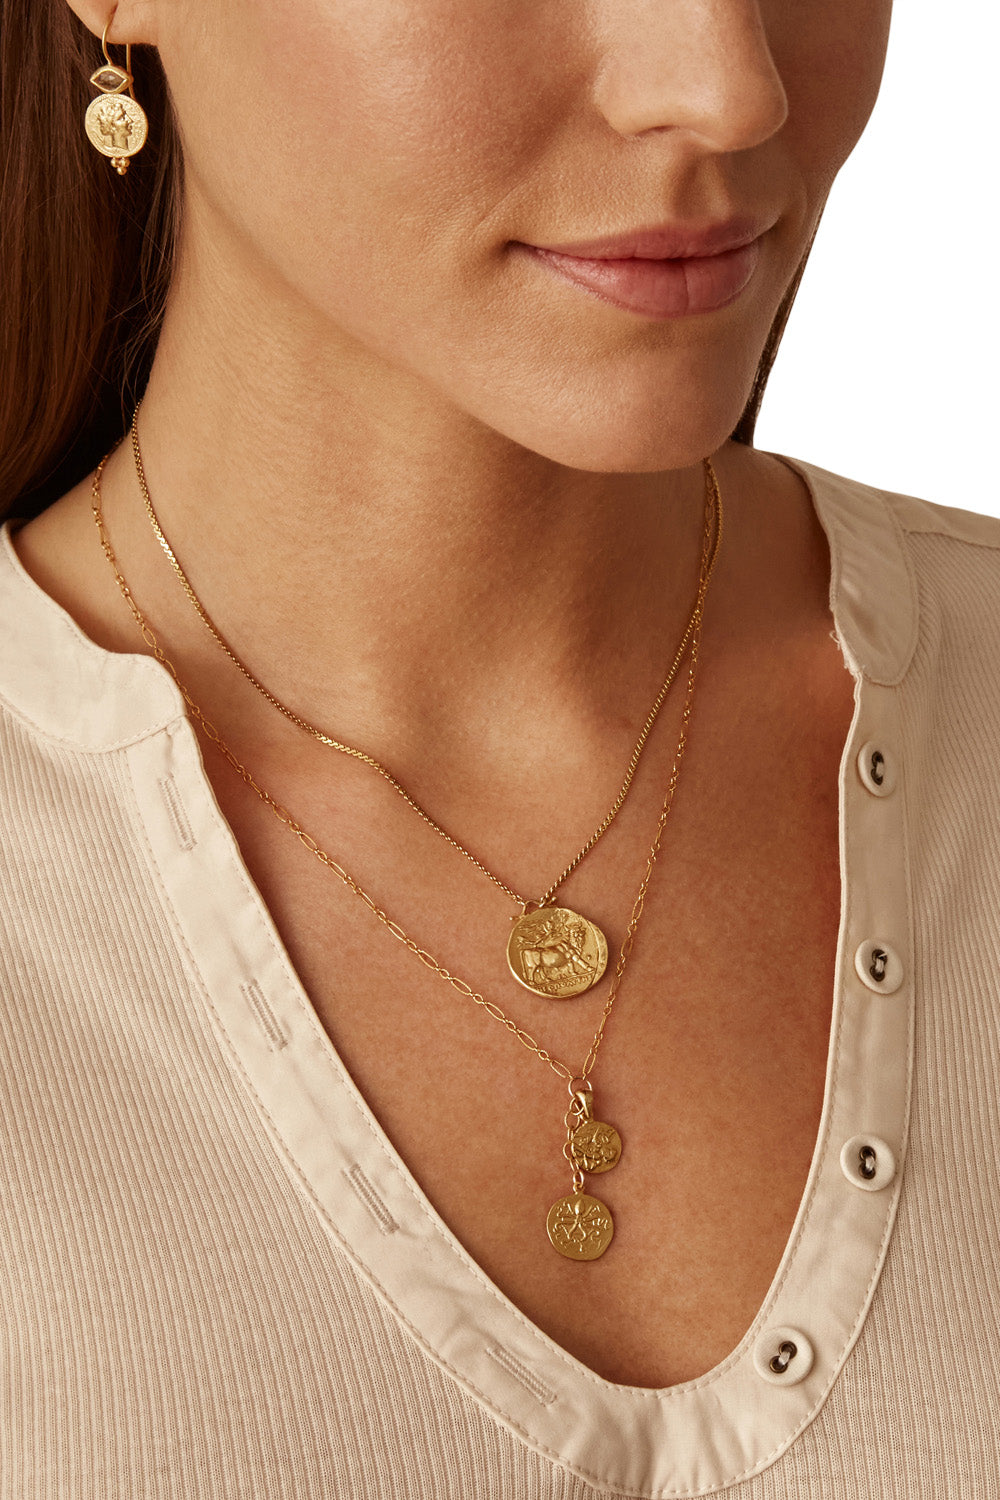 Chan Luu Hypatia Pendant Necklace in Yellow Gold